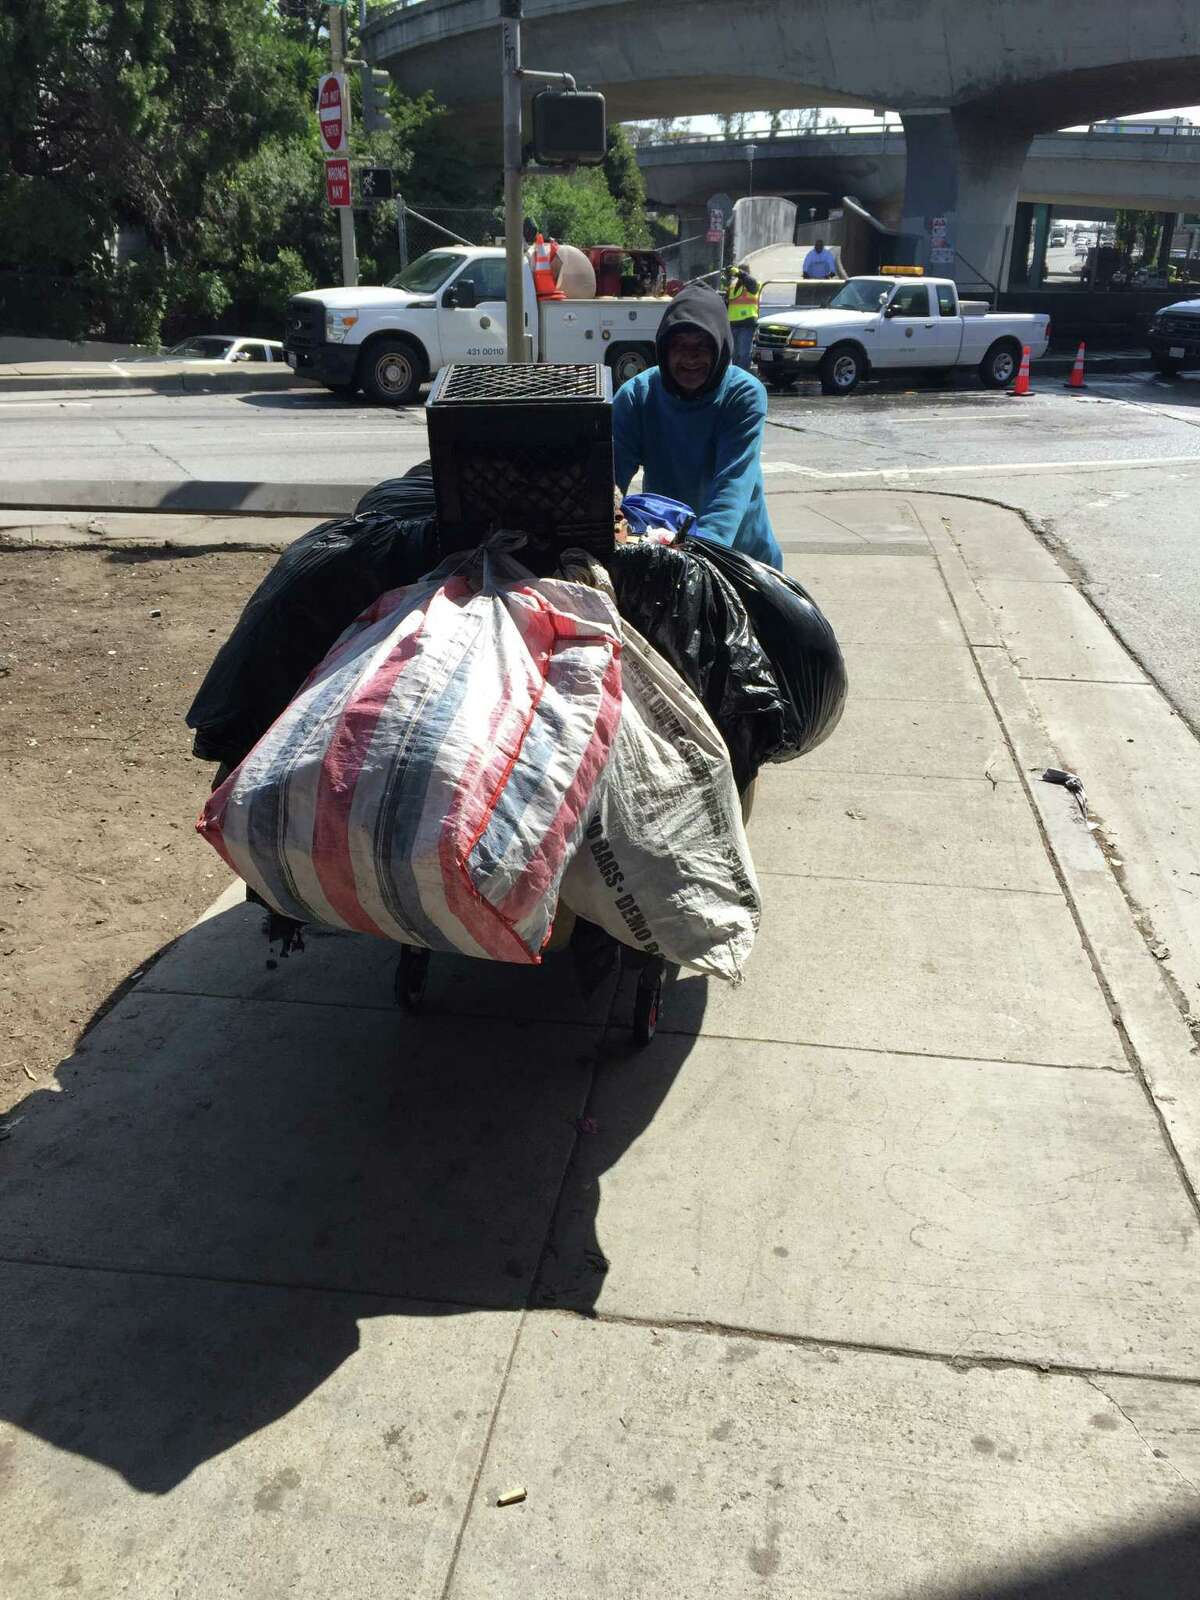 One homeless camper got all of his belongings neatly bagged up and onto his shopping cart.